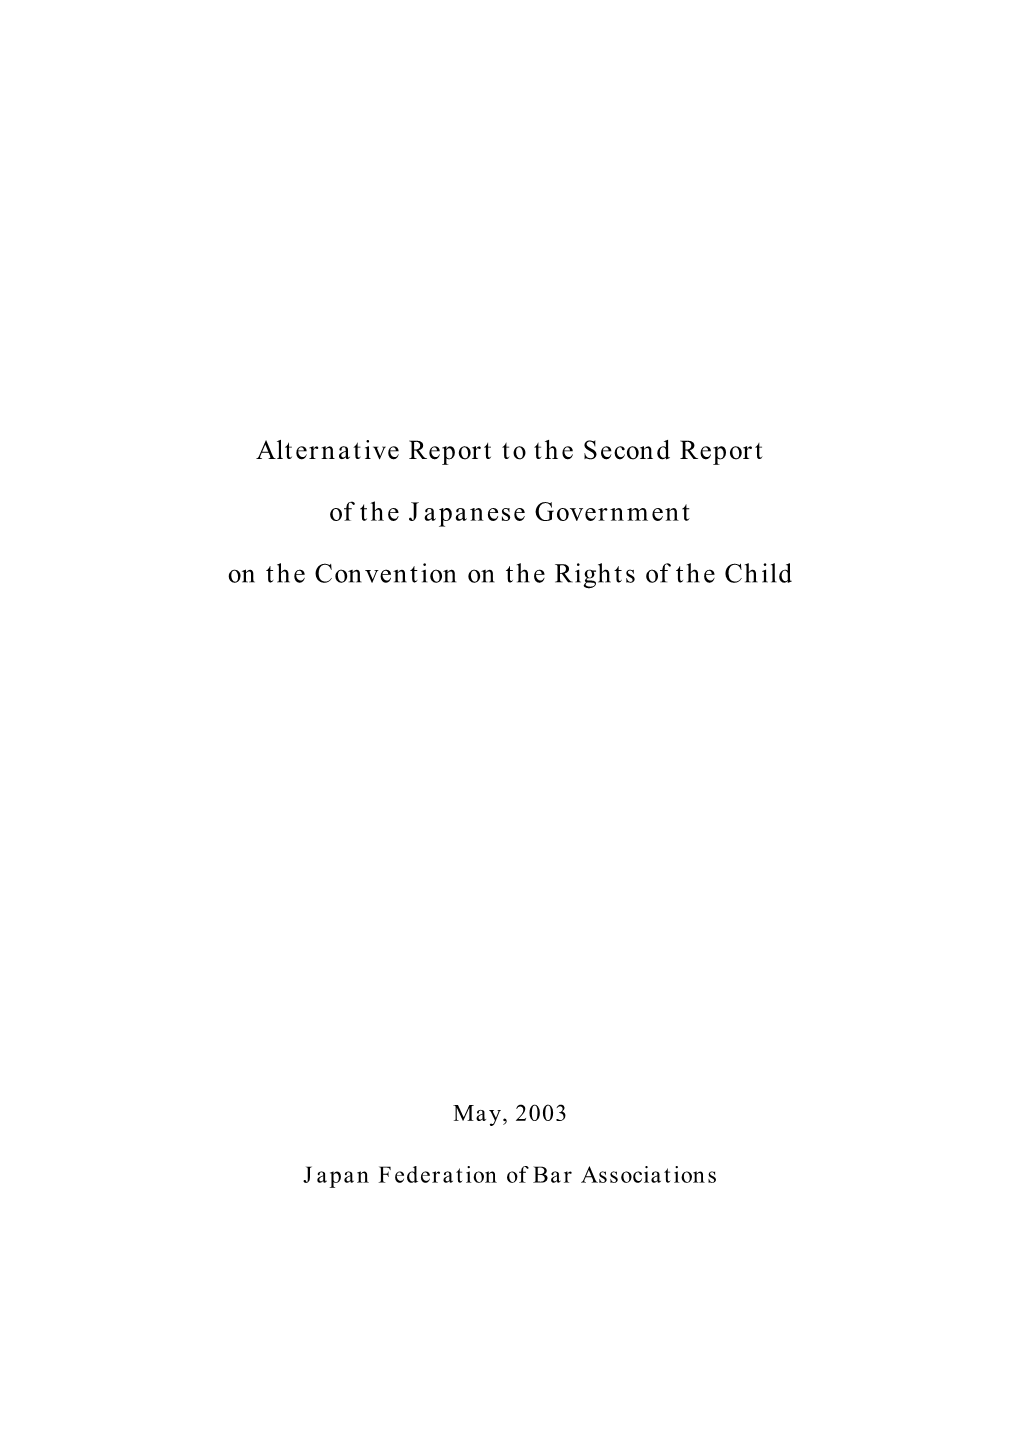 Alternative Report to the Second Report of the Japanese